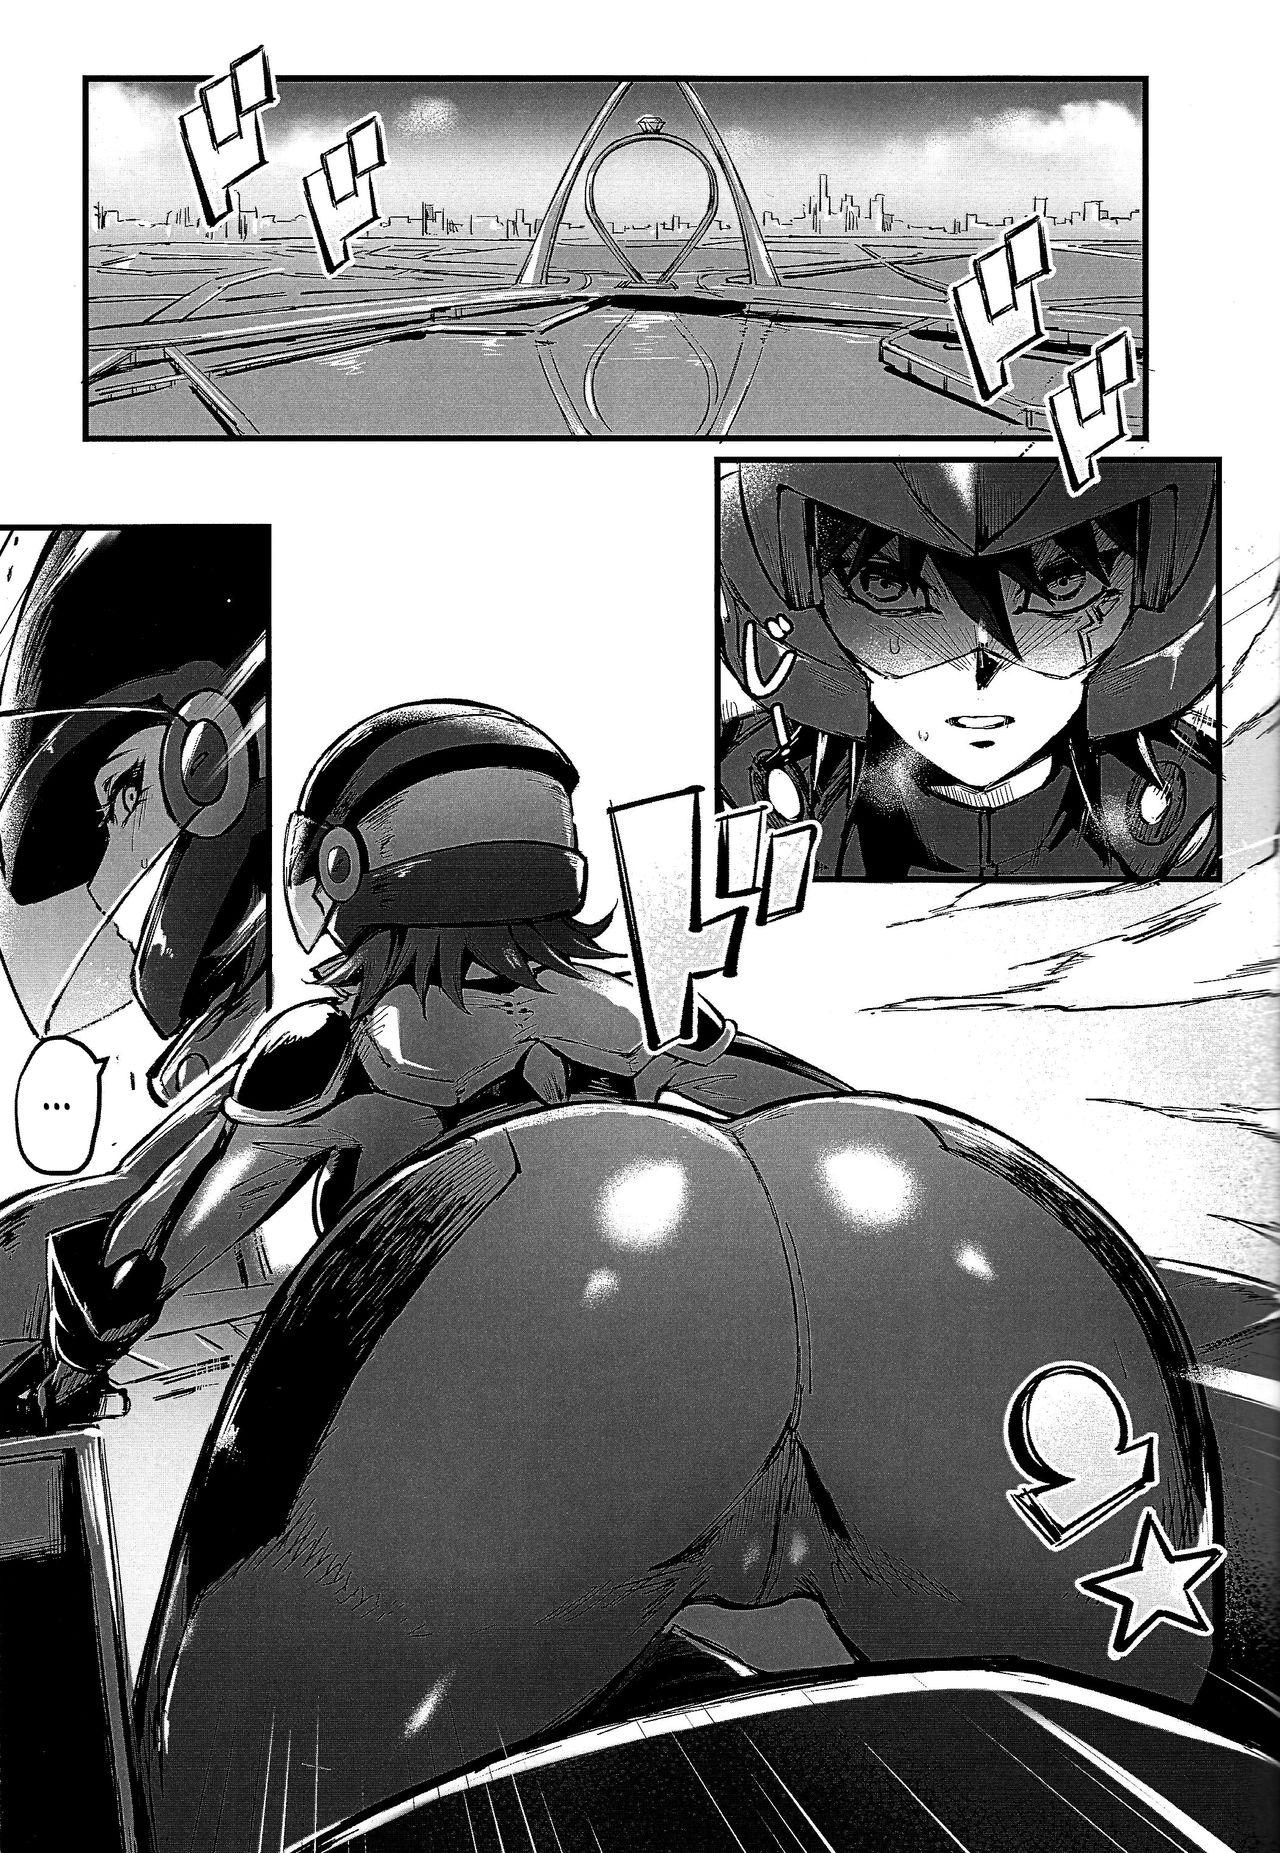 Oralsex MASK of D. - Yu-gi-oh 5ds Oldvsyoung - Page 2